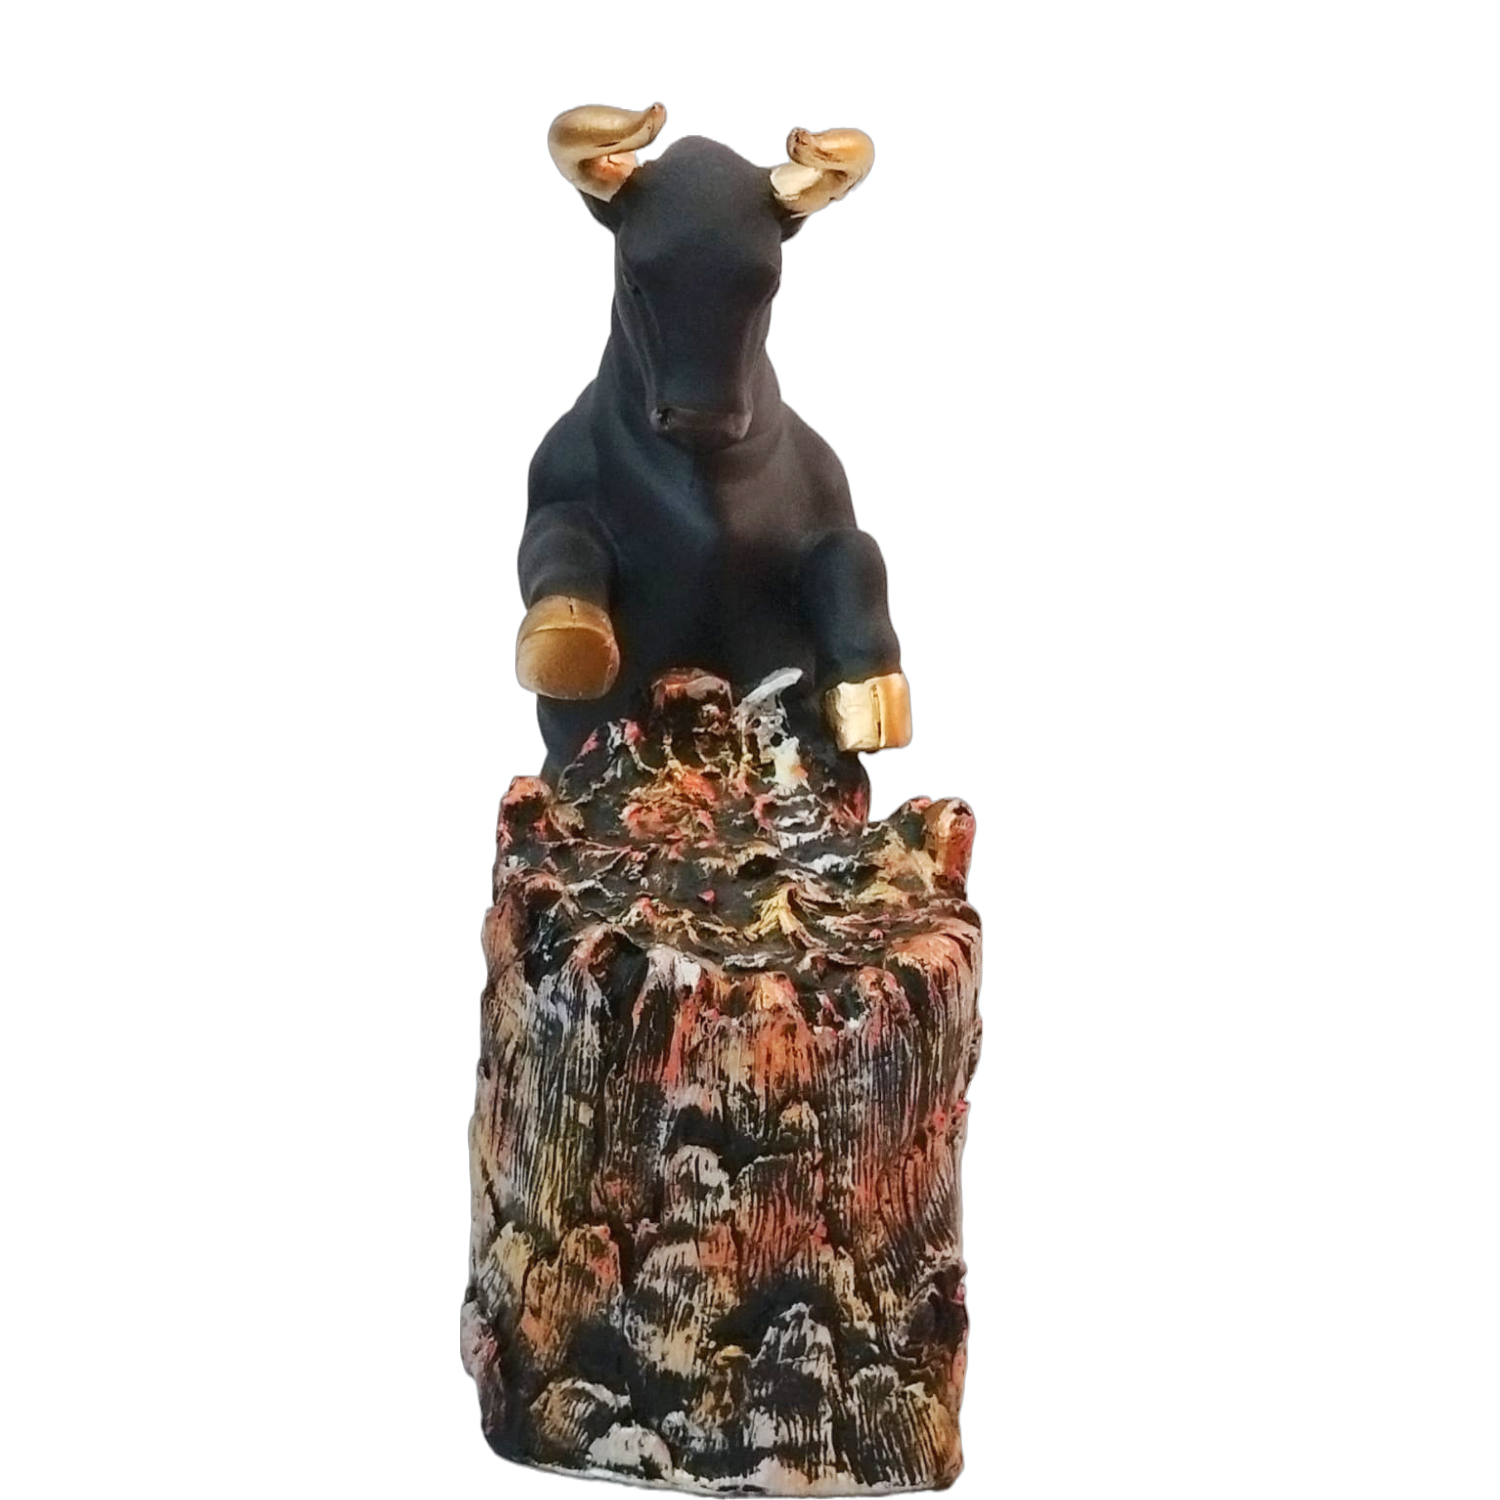 Statue ALiLA Bull with Log Statue Showpiece Idol for Gifting & Home Office Desk Table Decoration or Gifting, 10.5 inch Height Statue